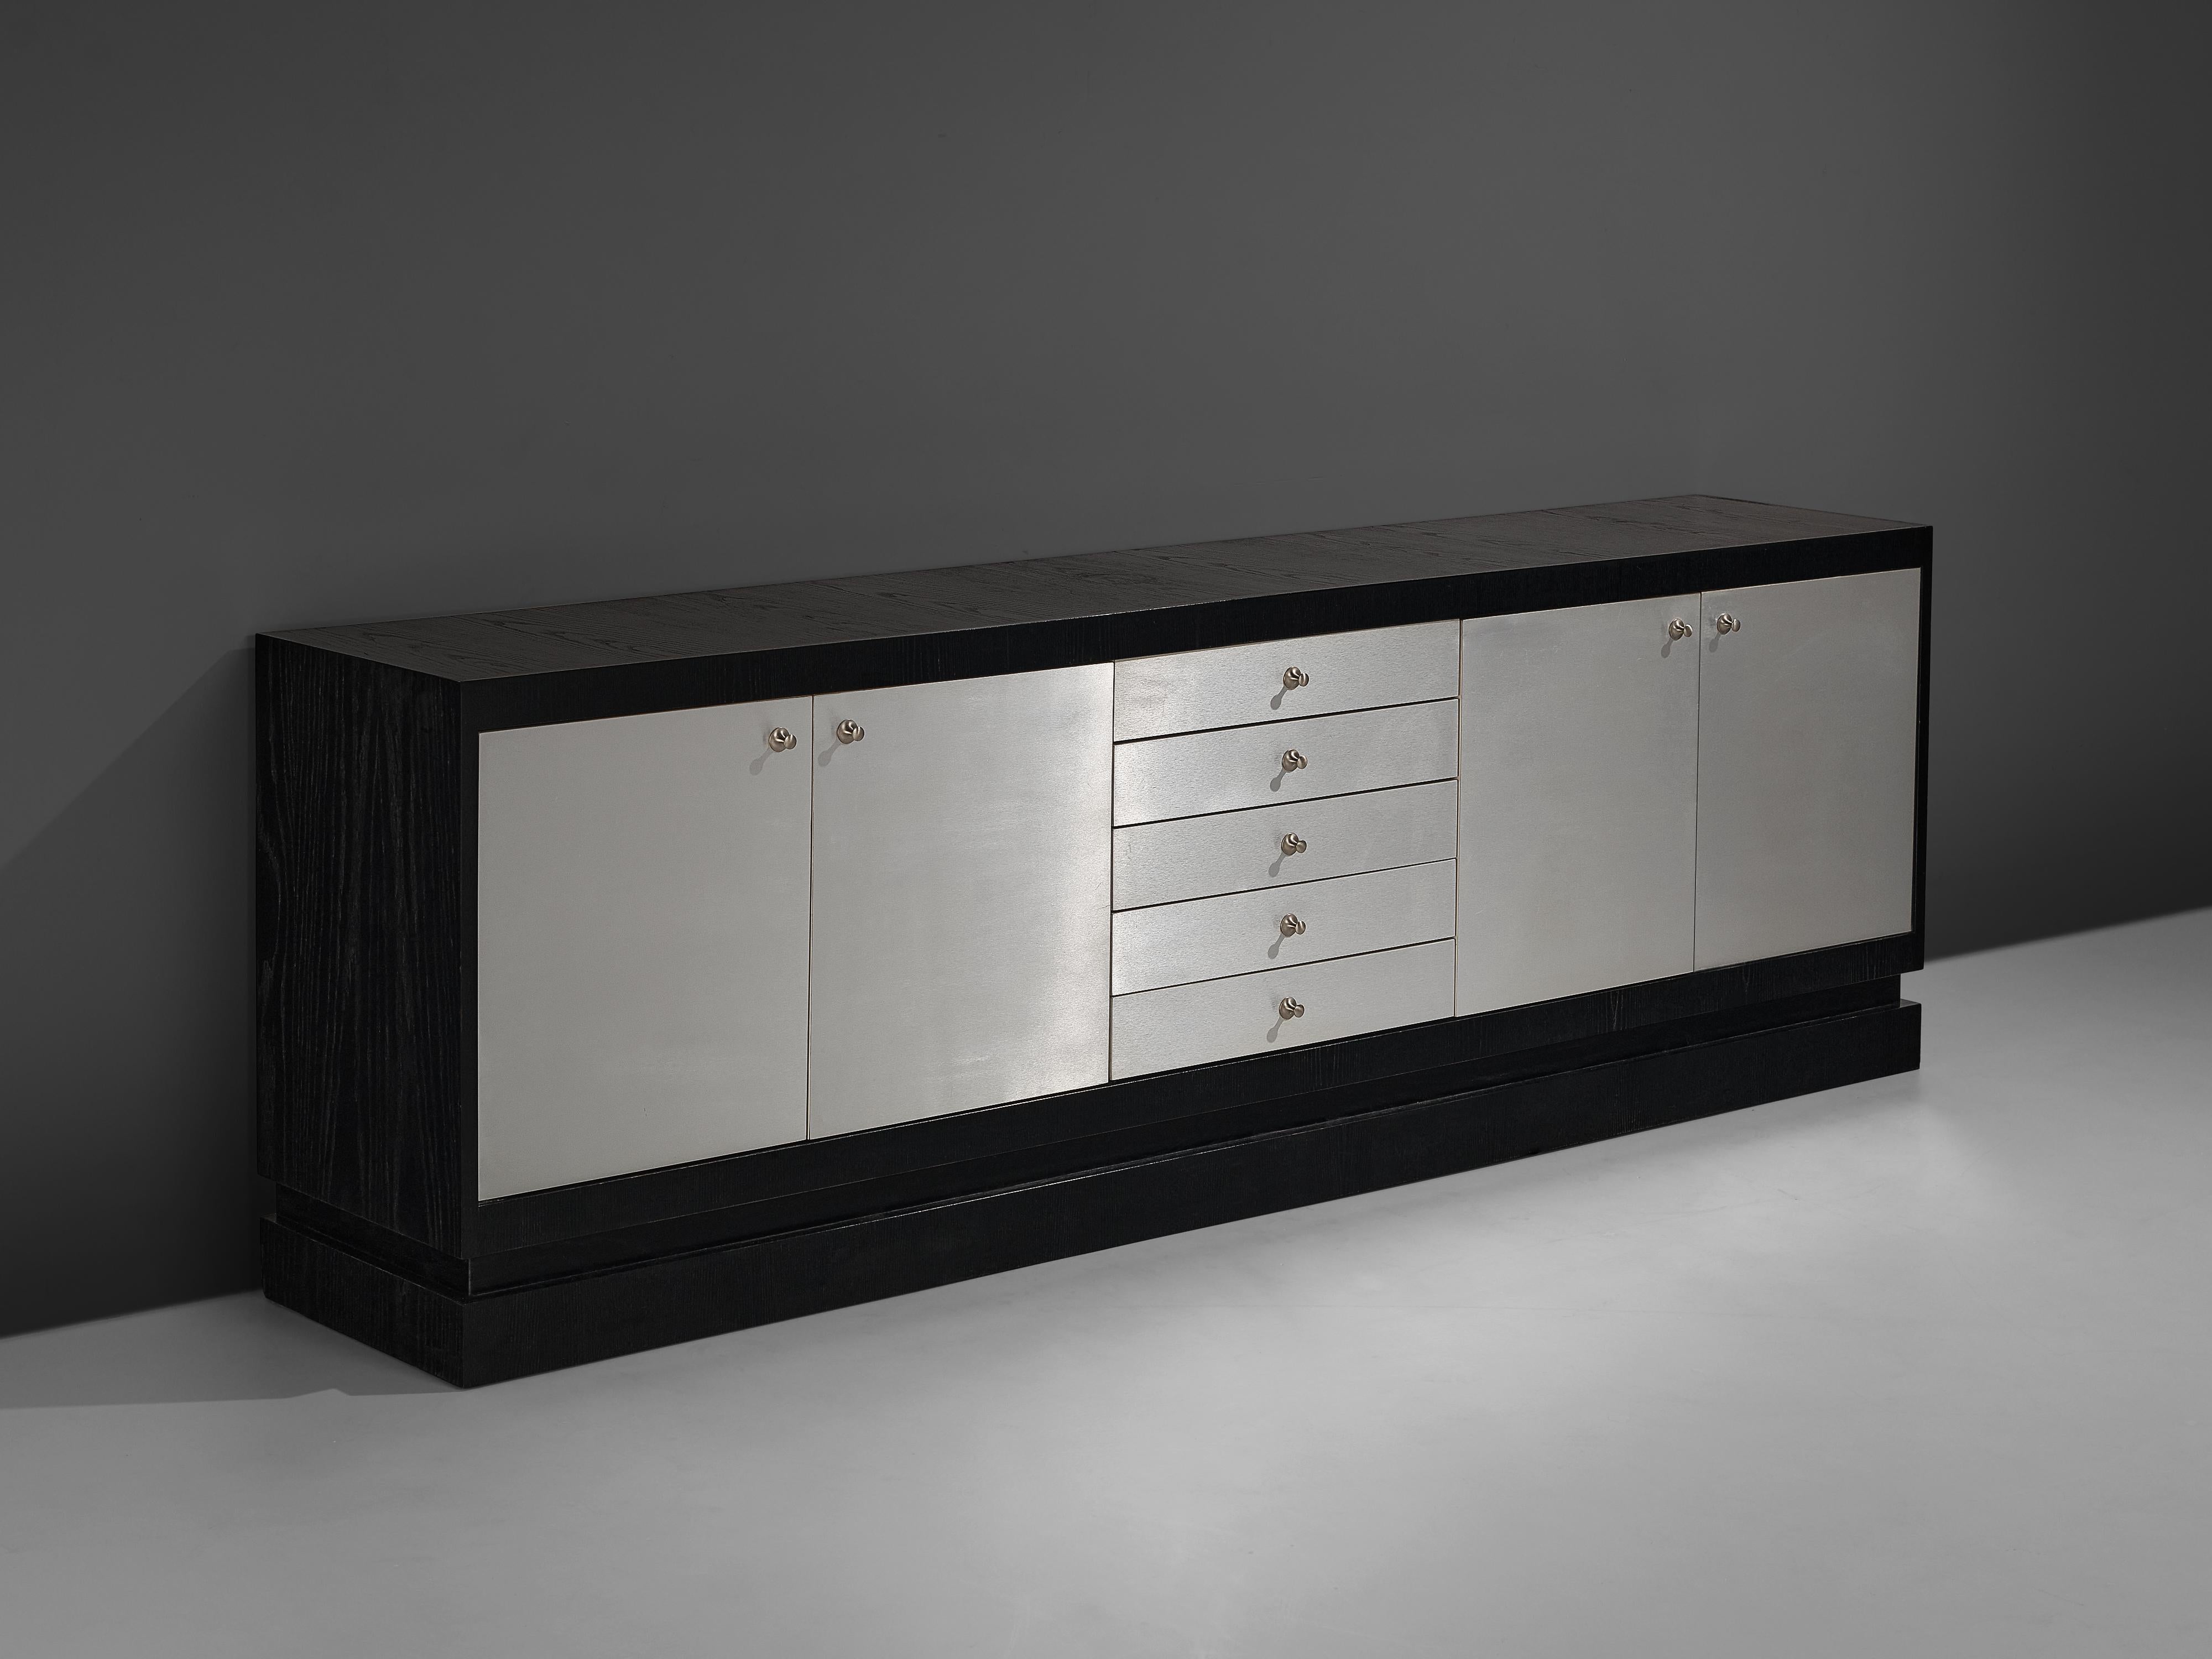 Sideboard, lacquered oak, aluminum, Belgium, 1970s 

Sideboard with aluminium plated doors and handles and a black wooden frame. The front is divided into two doors on both sides of a set of drawers in the middle. The frame and body of the sideboard